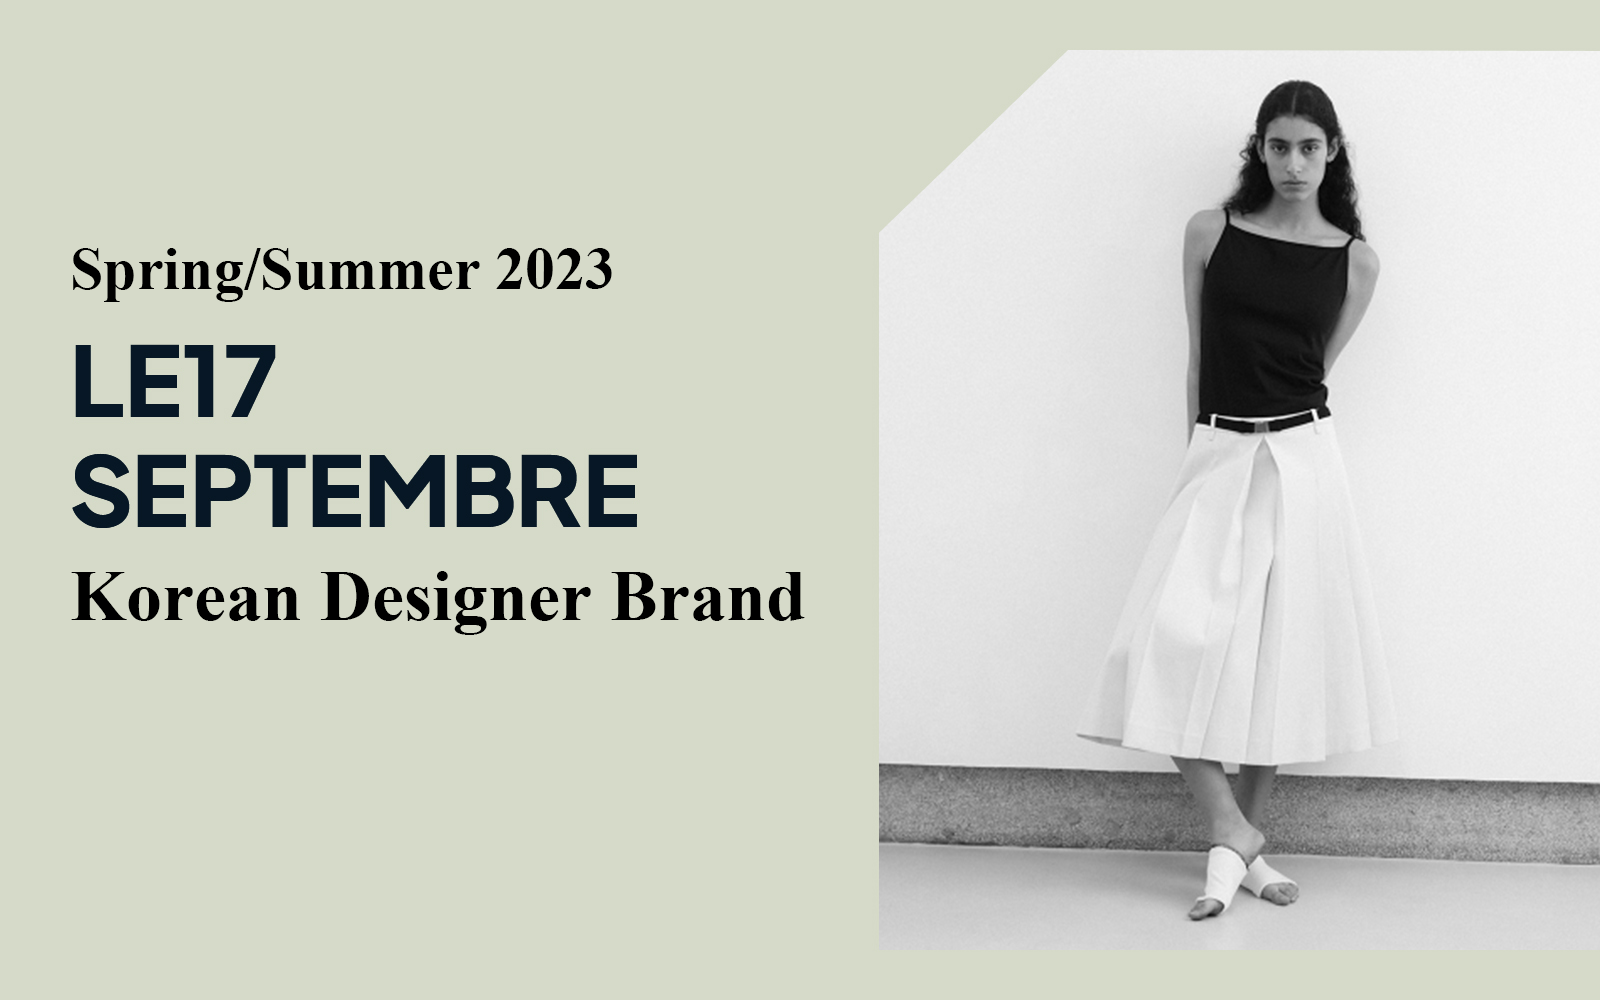 Clean Fit -- The Analysis of Le17 Sepembre The Womenswear Designer Brand